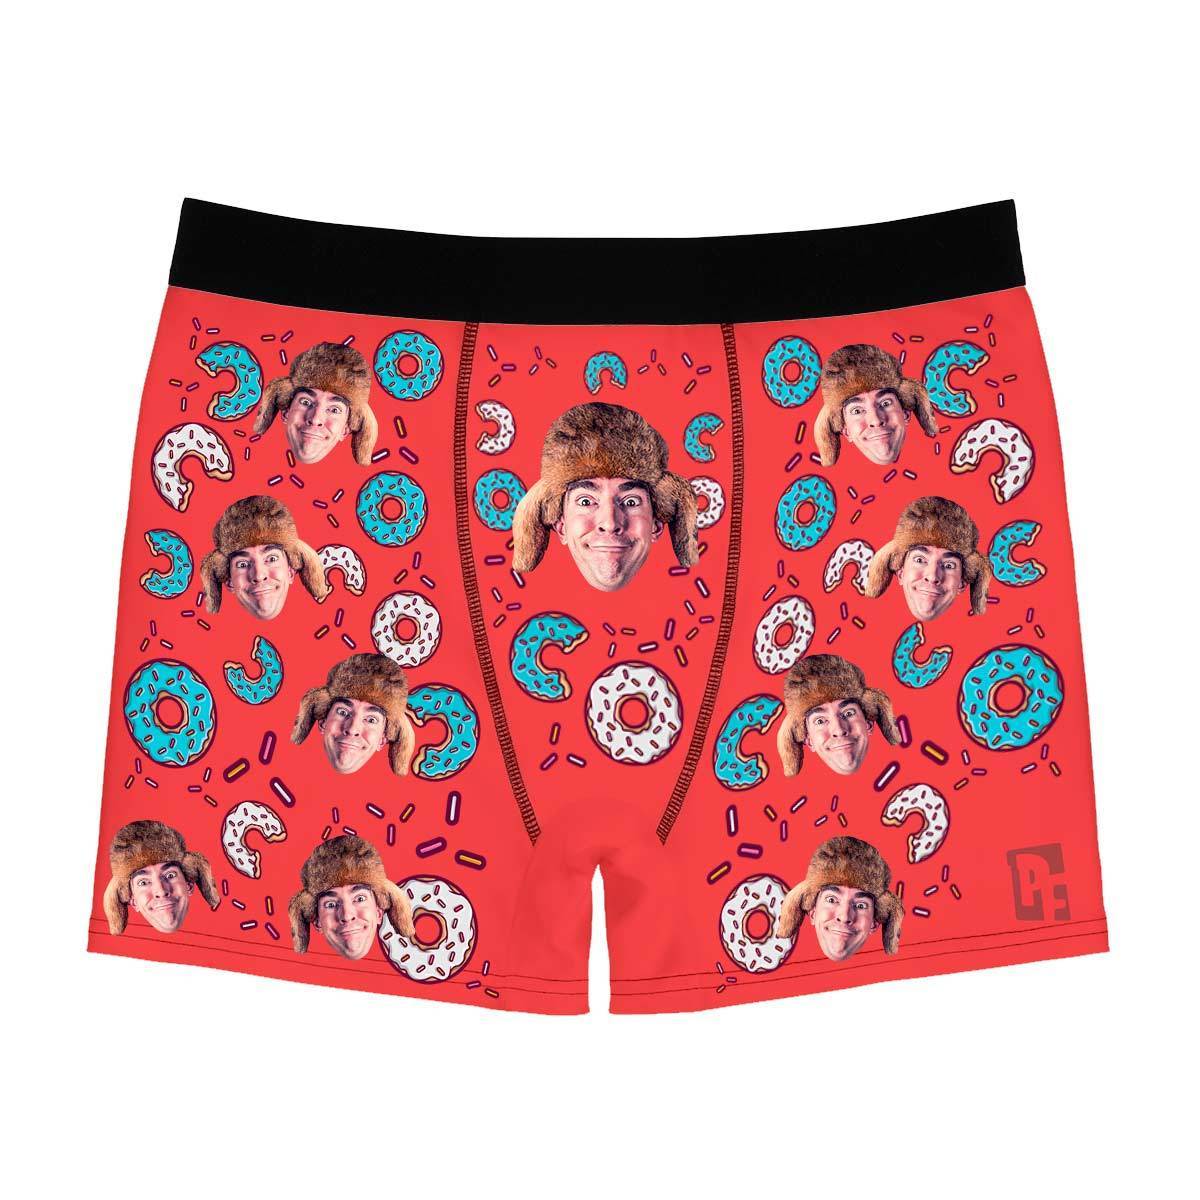 Red Donuts men's boxer briefs personalized with photo printed on them